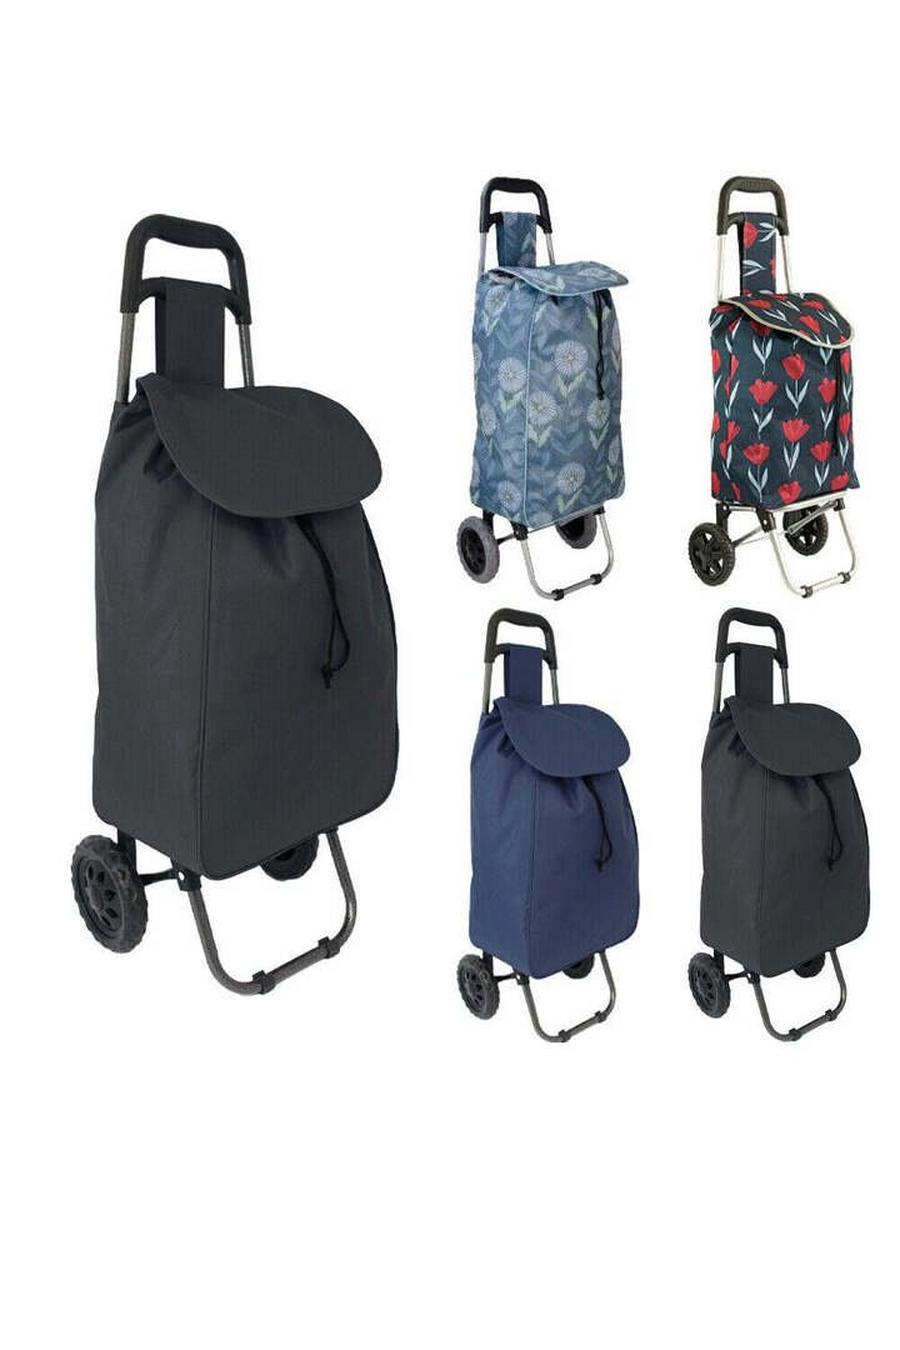 Black 40L Lightweight Wheeled Folding Durable Cart Strong Grocery Bag Shopping Trolley